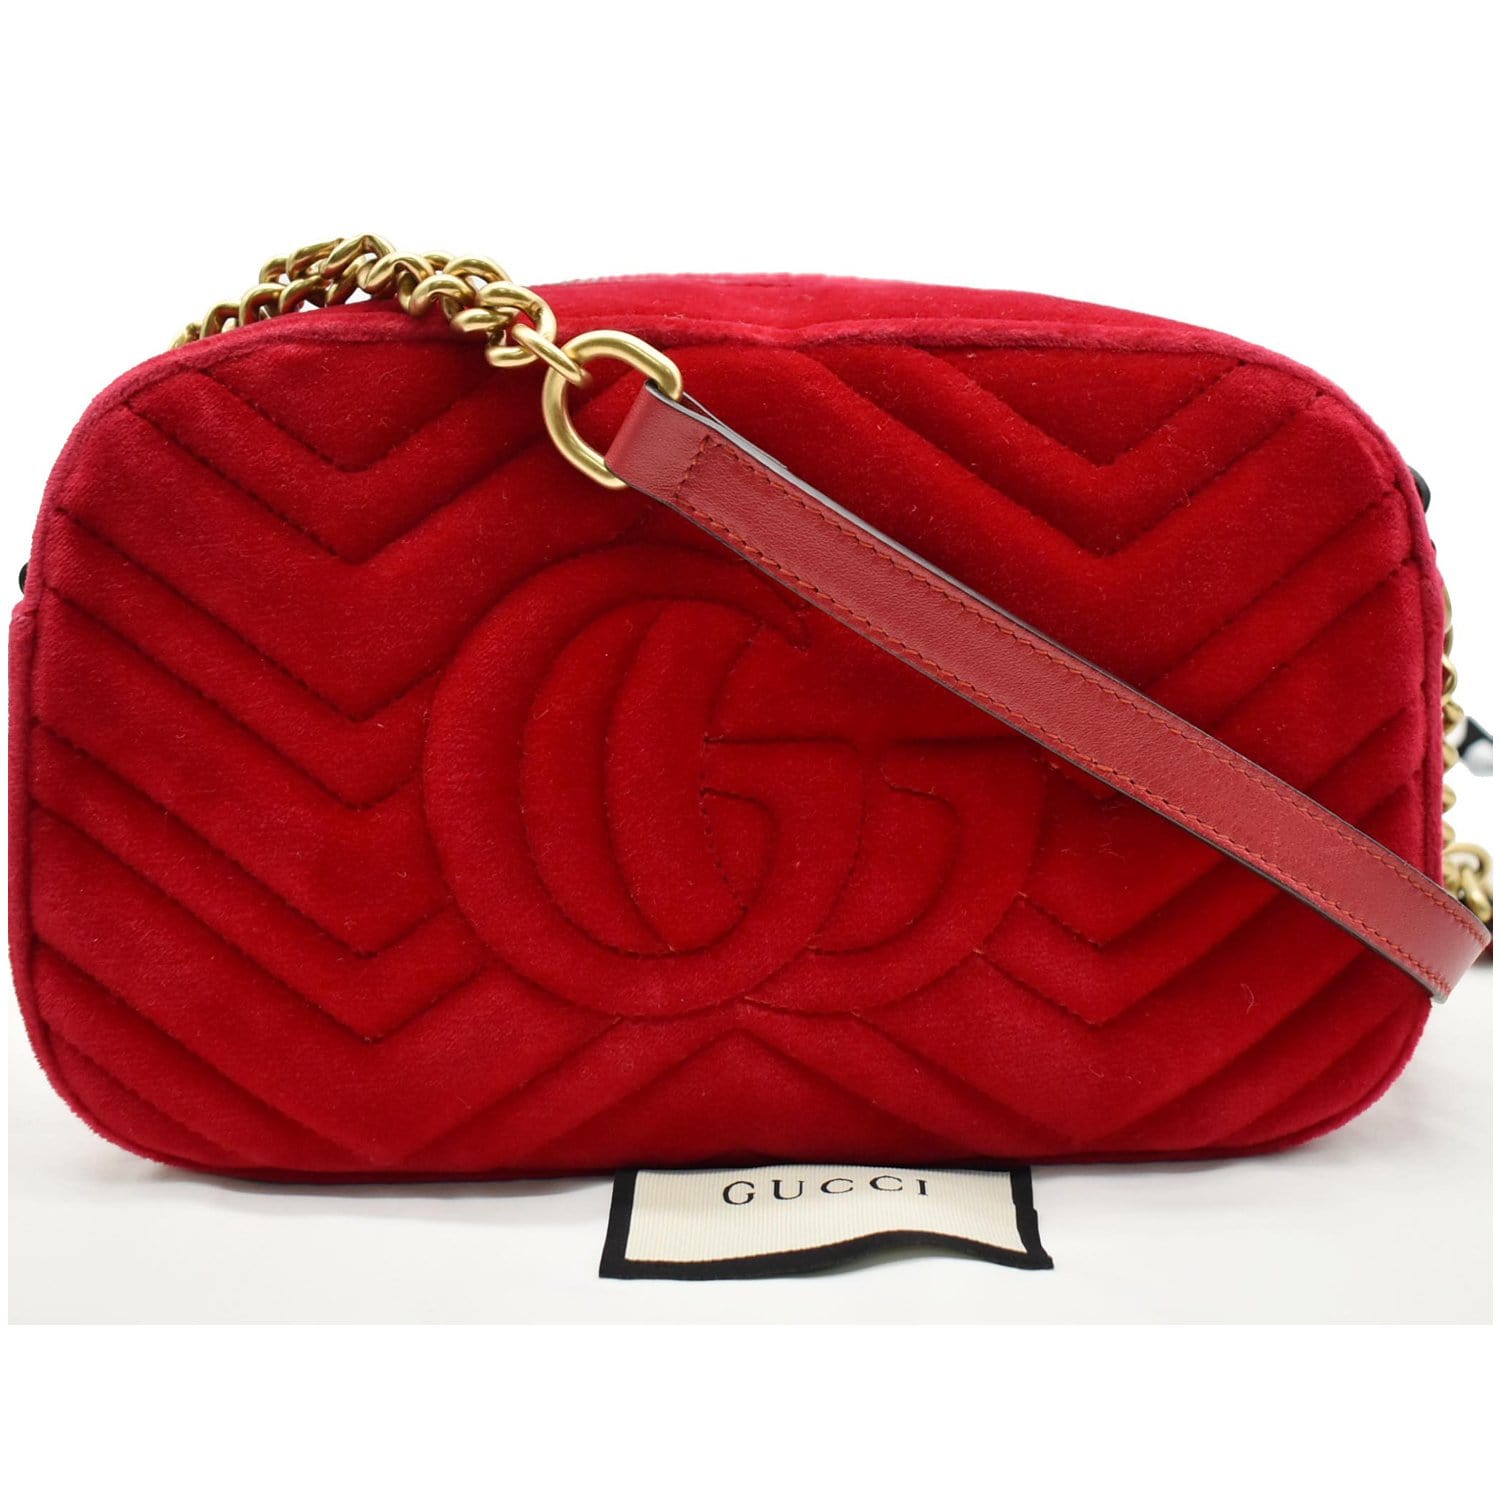 Gucci Women's GG Marmont Small Shoulder Bag - Red - Shoulder Bags